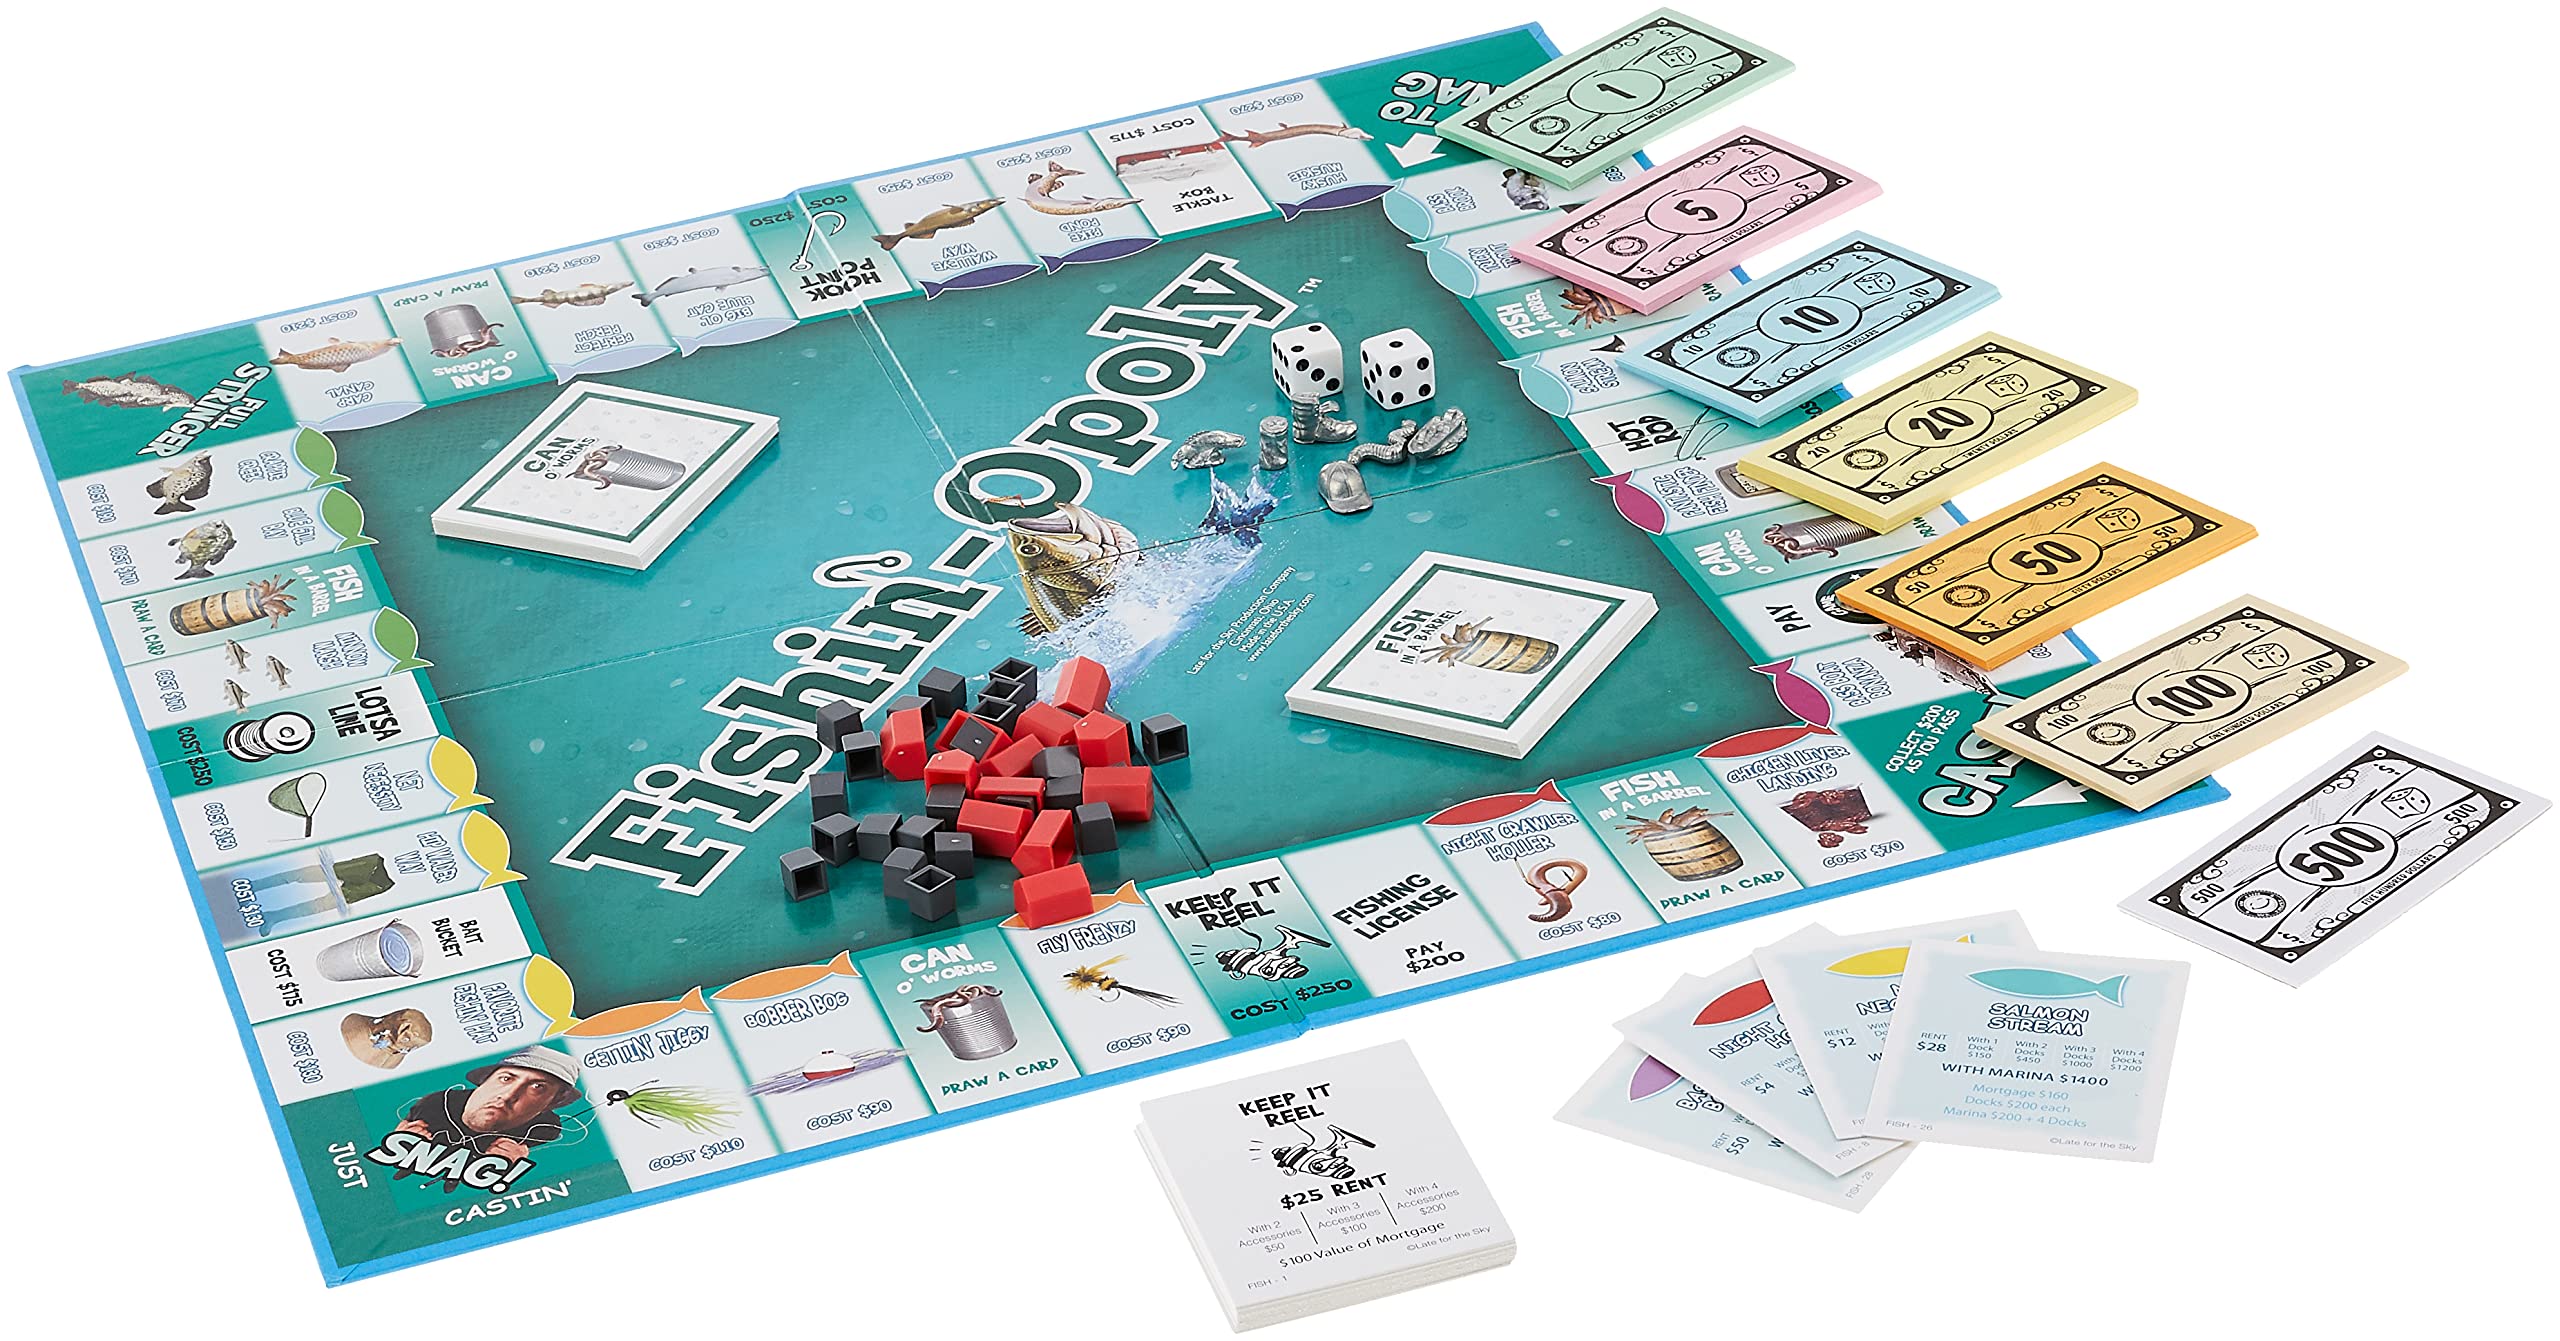 Late for the SkyFishin'-Opoly